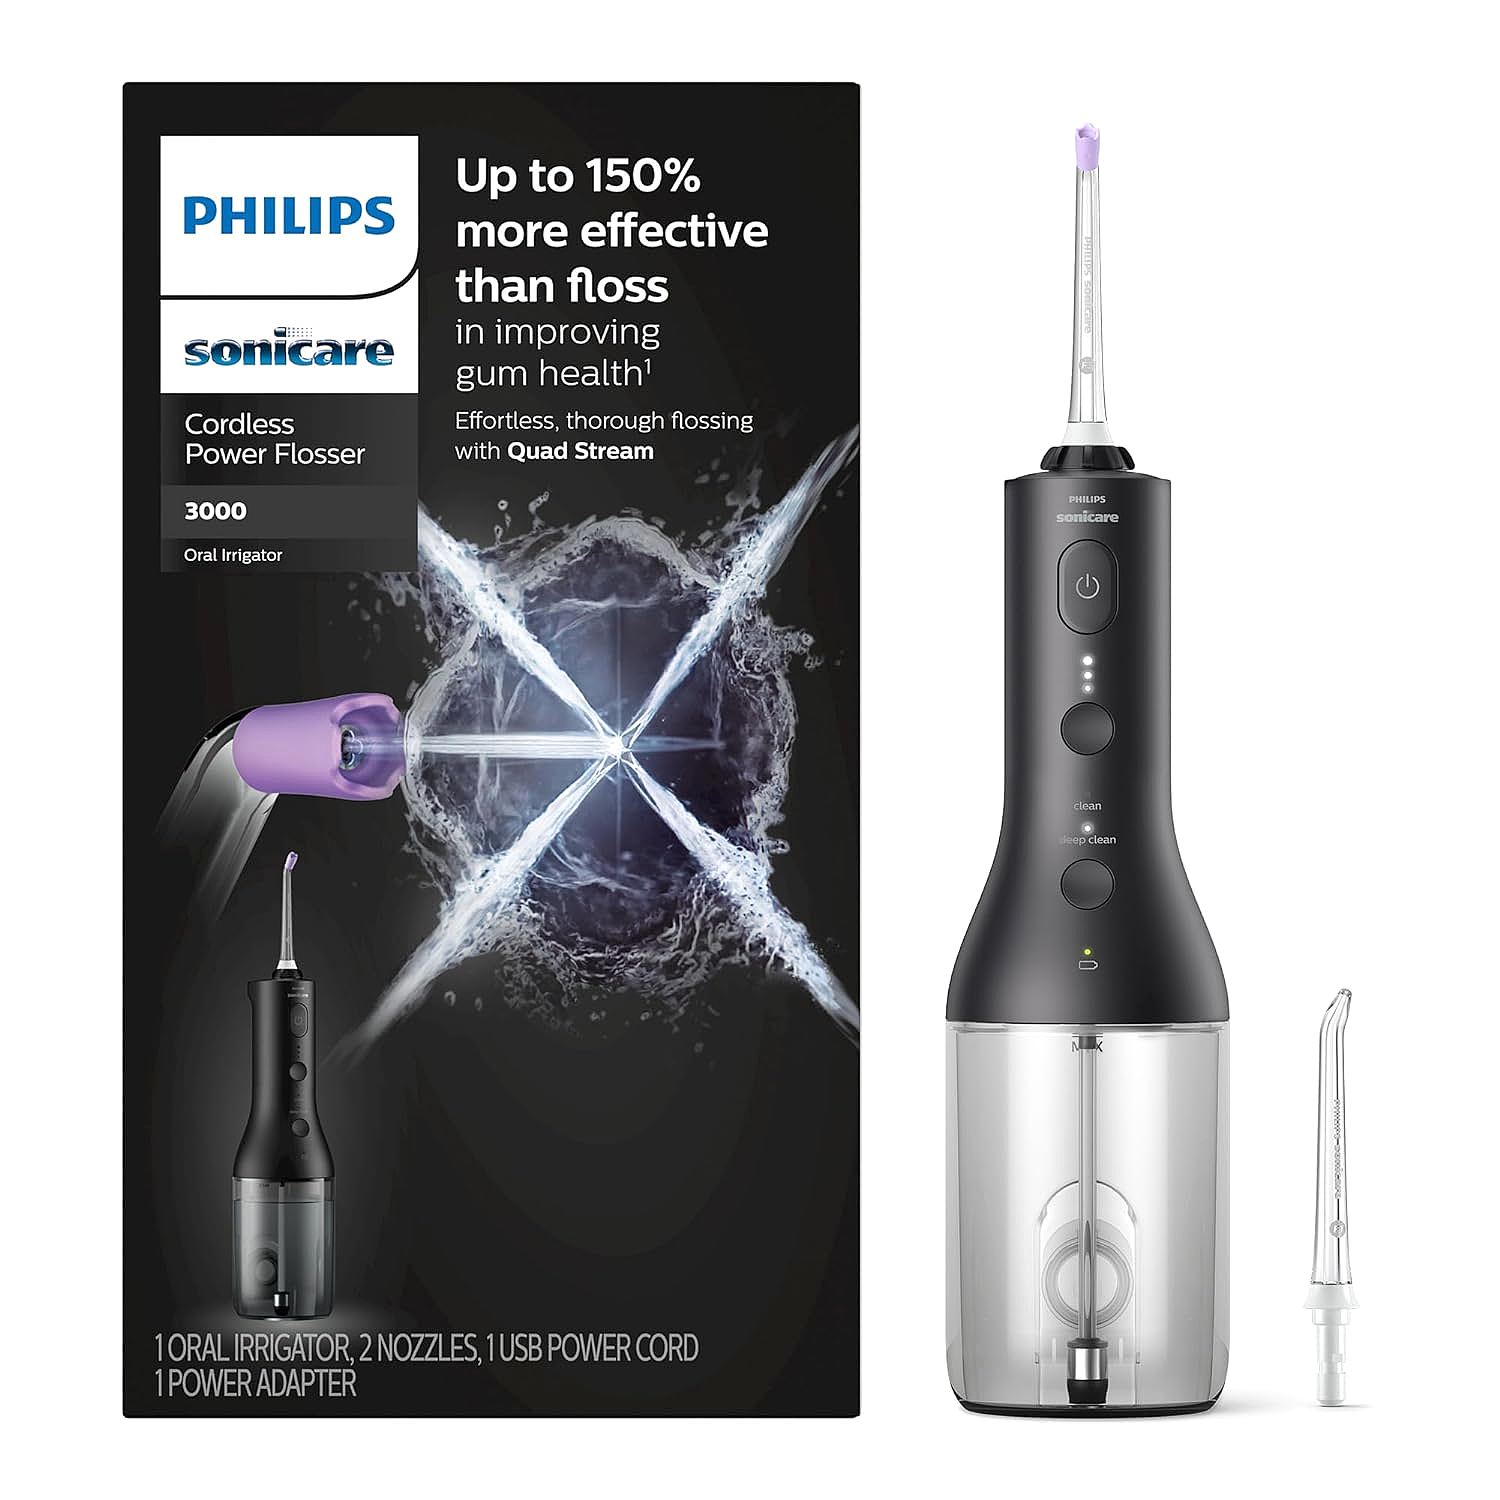 Philips Sonicare HX3826/23 Cordless Power Flosser: An Innovative 150% More Effective Oral Health Solution Than Traditional Floss